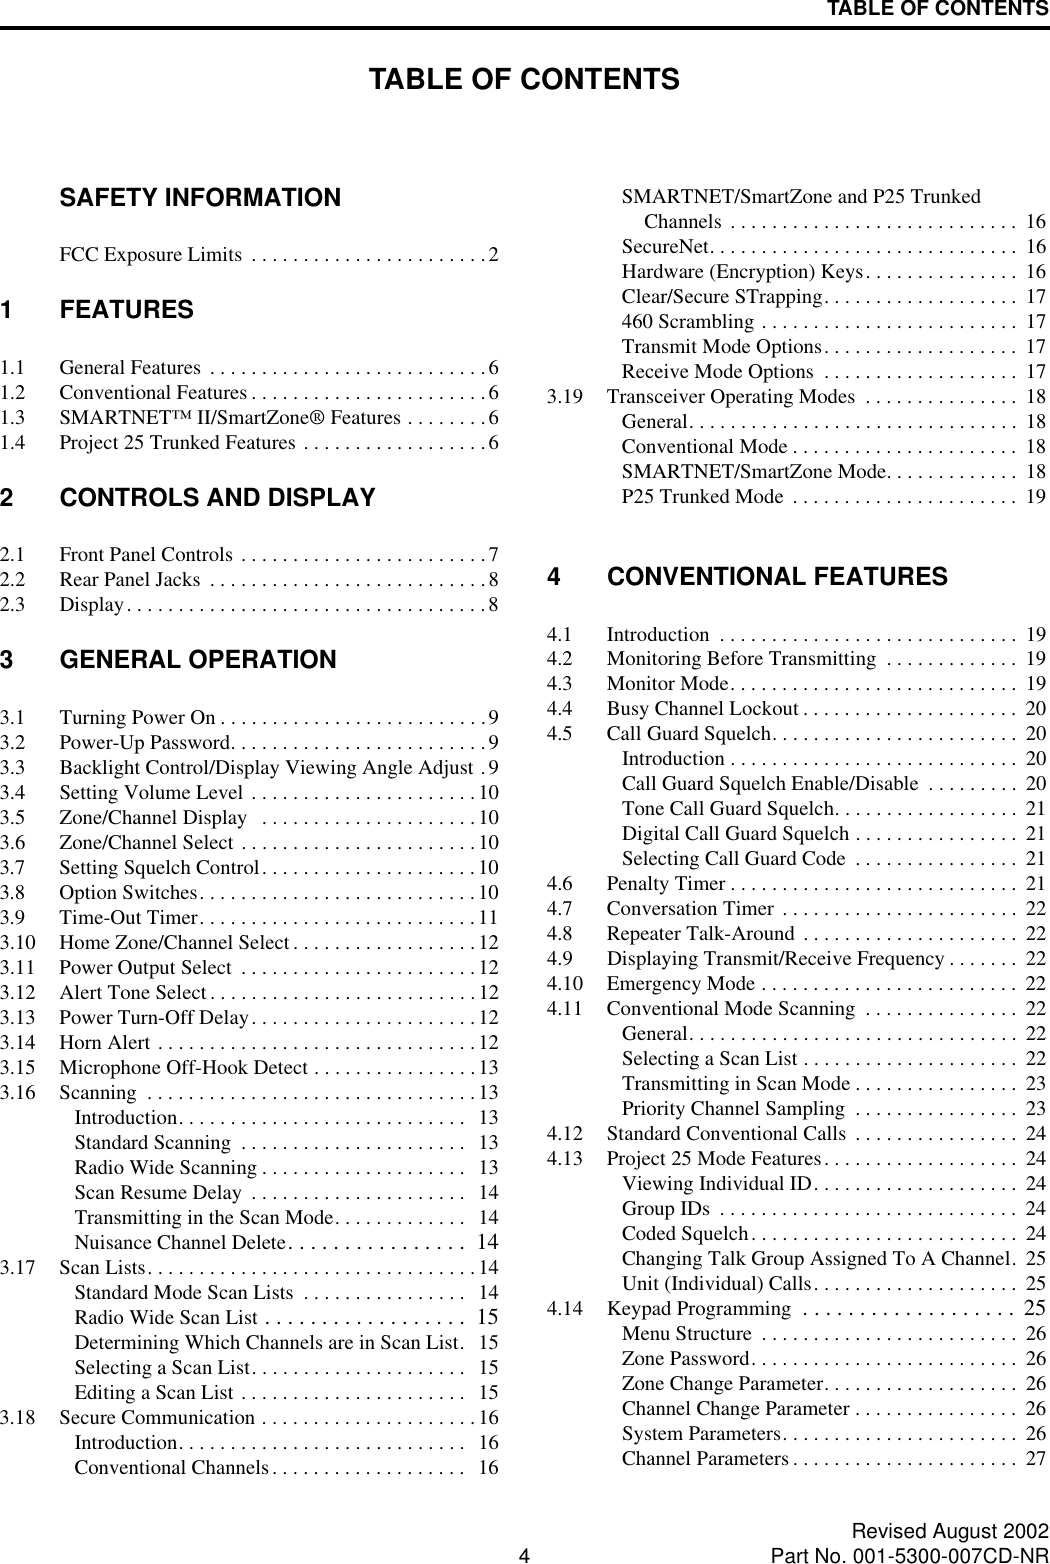 4Revised August 2002Part No. 001-5300-007CD-NRTABLE OF CONTENTSTABLE OF CONTENTSSAFETY INFORMATIONFCC Exposure Limits  . . . . . . . . . . . . . . . . . . . . . . . 21 FEATURES1.1 General Features . . . . . . . . . . . . . . . . . . . . . . . . . . .61.2 Conventional Features . . . . . . . . . . . . . . . . . . . . . . . 61.3 SMARTNET™ II/SmartZone® Features . . . . . . . .61.4 Project 25 Trunked Features . . . . . . . . . . . . . . . . . .62 CONTROLS AND DISPLAY2.1 Front Panel Controls . . . . . . . . . . . . . . . . . . . . . . . .72.2 Rear Panel Jacks  . . . . . . . . . . . . . . . . . . . . . . . . . . .82.3 Display. . . . . . . . . . . . . . . . . . . . . . . . . . . . . . . . . . .83 GENERAL OPERATION3.1 Turning Power On . . . . . . . . . . . . . . . . . . . . . . . . . .93.2 Power-Up Password. . . . . . . . . . . . . . . . . . . . . . . . .93.3 Backlight Control/Display Viewing Angle Adjust .93.4 Setting Volume Level . . . . . . . . . . . . . . . . . . . . . .103.5 Zone/Channel Display   . . . . . . . . . . . . . . . . . . . . .103.6 Zone/Channel Select . . . . . . . . . . . . . . . . . . . . . . .103.7 Setting Squelch Control. . . . . . . . . . . . . . . . . . . . .103.8 Option Switches. . . . . . . . . . . . . . . . . . . . . . . . . . .103.9 Time-Out Timer. . . . . . . . . . . . . . . . . . . . . . . . . . .113.10 Home Zone/Channel Select . . . . . . . . . . . . . . . . . . 123.11 Power Output Select  . . . . . . . . . . . . . . . . . . . . . . .123.12 Alert Tone Select . . . . . . . . . . . . . . . . . . . . . . . . . .123.13 Power Turn-Off Delay. . . . . . . . . . . . . . . . . . . . . .123.14 Horn Alert . . . . . . . . . . . . . . . . . . . . . . . . . . . . . . .123.15 Microphone Off-Hook Detect . . . . . . . . . . . . . . . . 133.16 Scanning  . . . . . . . . . . . . . . . . . . . . . . . . . . . . . . . . 13Introduction. . . . . . . . . . . . . . . . . . . . . . . . . . . .  13Standard Scanning  . . . . . . . . . . . . . . . . . . . . . .   13Radio Wide Scanning . . . . . . . . . . . . . . . . . . . .  13Scan Resume Delay  . . . . . . . . . . . . . . . . . . . . .  14Transmitting in the Scan Mode. . . . . . . . . . . . .   14Nuisance Channel Delete. . . . . . . . . . . . . . . .  143.17 Scan Lists. . . . . . . . . . . . . . . . . . . . . . . . . . . . . . . . 14Standard Mode Scan Lists  . . . . . . . . . . . . . . . .  14Radio Wide Scan List . . . . . . . . . . . . . . . . . .  15Determining Which Channels are in Scan List.   15Selecting a Scan List. . . . . . . . . . . . . . . . . . . . .  15Editing a Scan List . . . . . . . . . . . . . . . . . . . . . .  153.18 Secure Communication . . . . . . . . . . . . . . . . . . . . .16Introduction. . . . . . . . . . . . . . . . . . . . . . . . . . . .  16Conventional Channels. . . . . . . . . . . . . . . . . . .  16SMARTNET/SmartZone and P25 Trunked Channels . . . . . . . . . . . . . . . . . . . . . . . . . . . .  16SecureNet. . . . . . . . . . . . . . . . . . . . . . . . . . . . . .  16Hardware (Encryption) Keys. . . . . . . . . . . . . . .  16Clear/Secure STrapping. . . . . . . . . . . . . . . . . . .  17460 Scrambling . . . . . . . . . . . . . . . . . . . . . . . . .  17Transmit Mode Options. . . . . . . . . . . . . . . . . . .  17Receive Mode Options  . . . . . . . . . . . . . . . . . . .  173.19 Transceiver Operating Modes  . . . . . . . . . . . . . . .  18General. . . . . . . . . . . . . . . . . . . . . . . . . . . . . . . .  18Conventional Mode . . . . . . . . . . . . . . . . . . . . . .  18SMARTNET/SmartZone Mode. . . . . . . . . . . . .  18P25 Trunked Mode  . . . . . . . . . . . . . . . . . . . . . .  194 CONVENTIONAL FEATURES4.1 Introduction  . . . . . . . . . . . . . . . . . . . . . . . . . . . . .  194.2 Monitoring Before Transmitting  . . . . . . . . . . . . .  194.3 Monitor Mode. . . . . . . . . . . . . . . . . . . . . . . . . . . .  194.4 Busy Channel Lockout . . . . . . . . . . . . . . . . . . . . .  204.5 Call Guard Squelch. . . . . . . . . . . . . . . . . . . . . . . .  20Introduction . . . . . . . . . . . . . . . . . . . . . . . . . . . .  20Call Guard Squelch Enable/Disable  . . . . . . . . .  20Tone Call Guard Squelch. . . . . . . . . . . . . . . . . .  21Digital Call Guard Squelch . . . . . . . . . . . . . . . .  21Selecting Call Guard Code  . . . . . . . . . . . . . . . .  214.6 Penalty Timer . . . . . . . . . . . . . . . . . . . . . . . . . . . .  214.7 Conversation Timer . . . . . . . . . . . . . . . . . . . . . . .  224.8 Repeater Talk-Around . . . . . . . . . . . . . . . . . . . . .  224.9 Displaying Transmit/Receive Frequency . . . . . . .  224.10 Emergency Mode . . . . . . . . . . . . . . . . . . . . . . . . .  224.11 Conventional Mode Scanning  . . . . . . . . . . . . . . .  22General. . . . . . . . . . . . . . . . . . . . . . . . . . . . . . . .  22Selecting a Scan List . . . . . . . . . . . . . . . . . . . . .  22Transmitting in Scan Mode . . . . . . . . . . . . . . . .  23Priority Channel Sampling  . . . . . . . . . . . . . . . .  234.12 Standard Conventional Calls  . . . . . . . . . . . . . . . .  244.13 Project 25 Mode Features. . . . . . . . . . . . . . . . . . .  24Viewing Individual ID. . . . . . . . . . . . . . . . . . . .  24Group IDs  . . . . . . . . . . . . . . . . . . . . . . . . . . . . .  24Coded Squelch. . . . . . . . . . . . . . . . . . . . . . . . . .  24Changing Talk Group Assigned To A Channel.  25Unit (Individual) Calls. . . . . . . . . . . . . . . . . . . .  254.14 Keypad Programming  . . . . . . . . . . . . . . . . . . .  25Menu Structure  . . . . . . . . . . . . . . . . . . . . . . . . .  26Zone Password. . . . . . . . . . . . . . . . . . . . . . . . . .  26Zone Change Parameter. . . . . . . . . . . . . . . . . . .  26Channel Change Parameter . . . . . . . . . . . . . . . .  26System Parameters. . . . . . . . . . . . . . . . . . . . . . .  26Channel Parameters . . . . . . . . . . . . . . . . . . . . . .  27